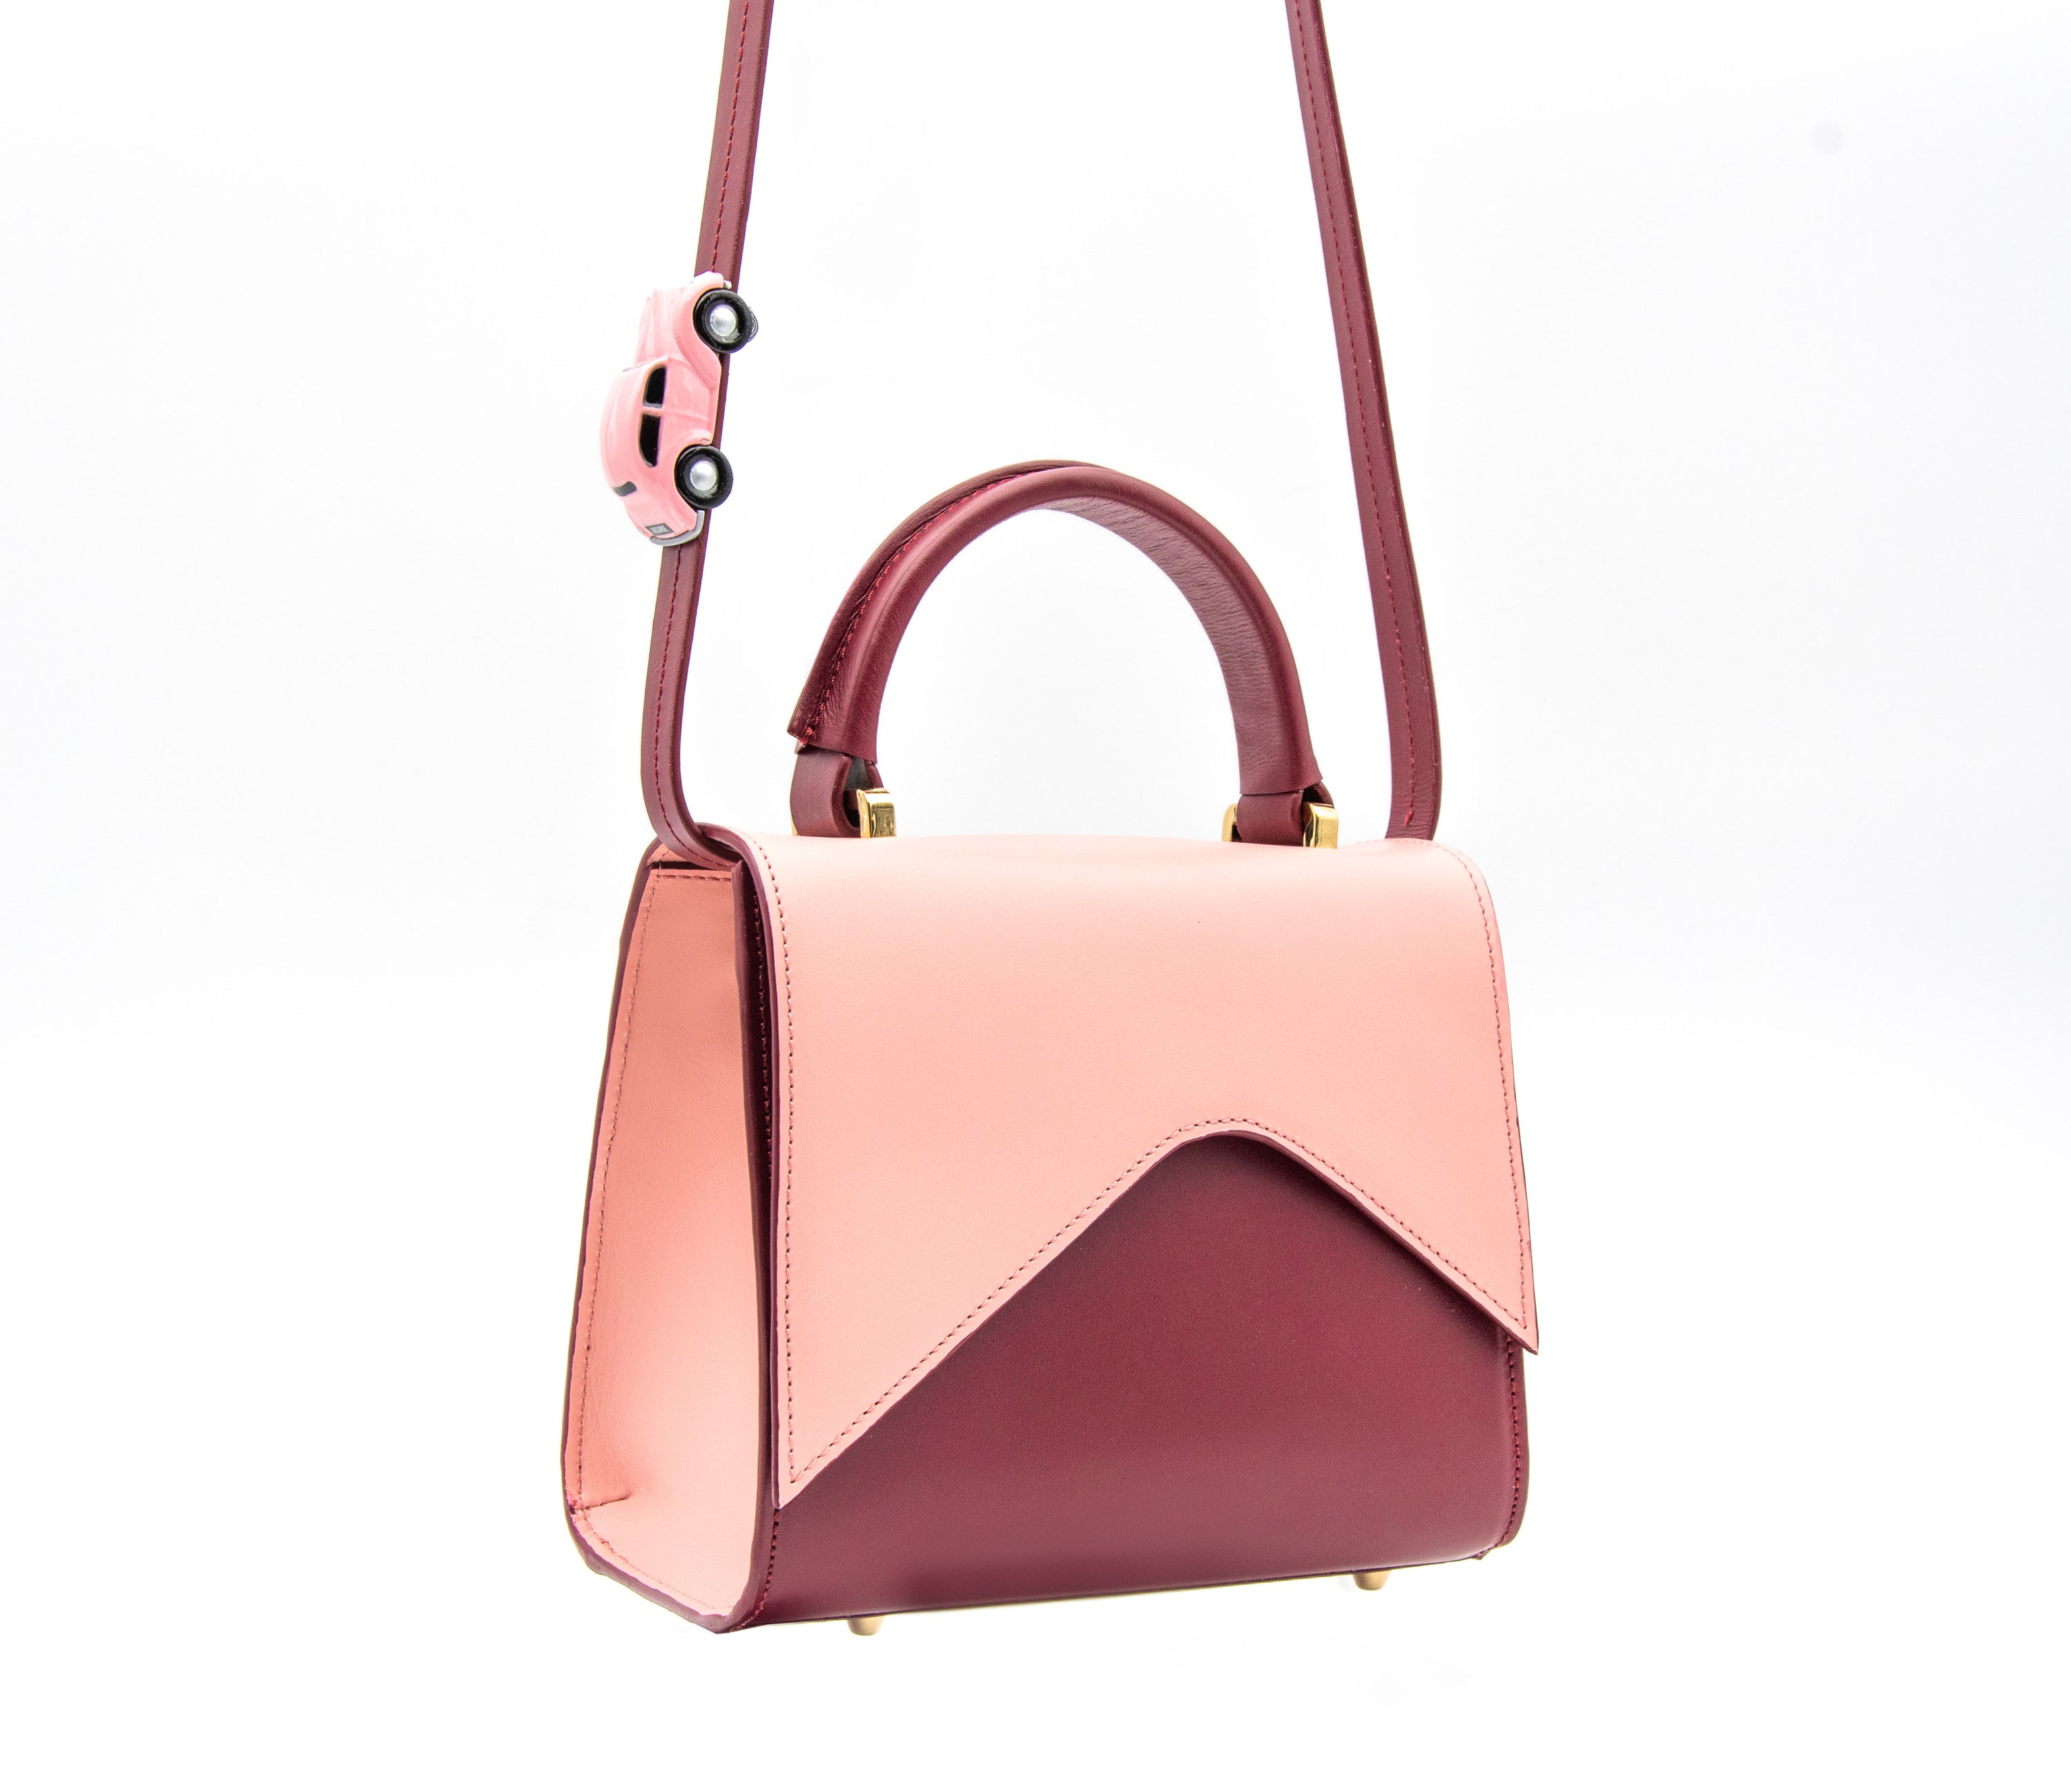 MOUNTAIN ROAD Pink and Burgundy small leather shoulder bag